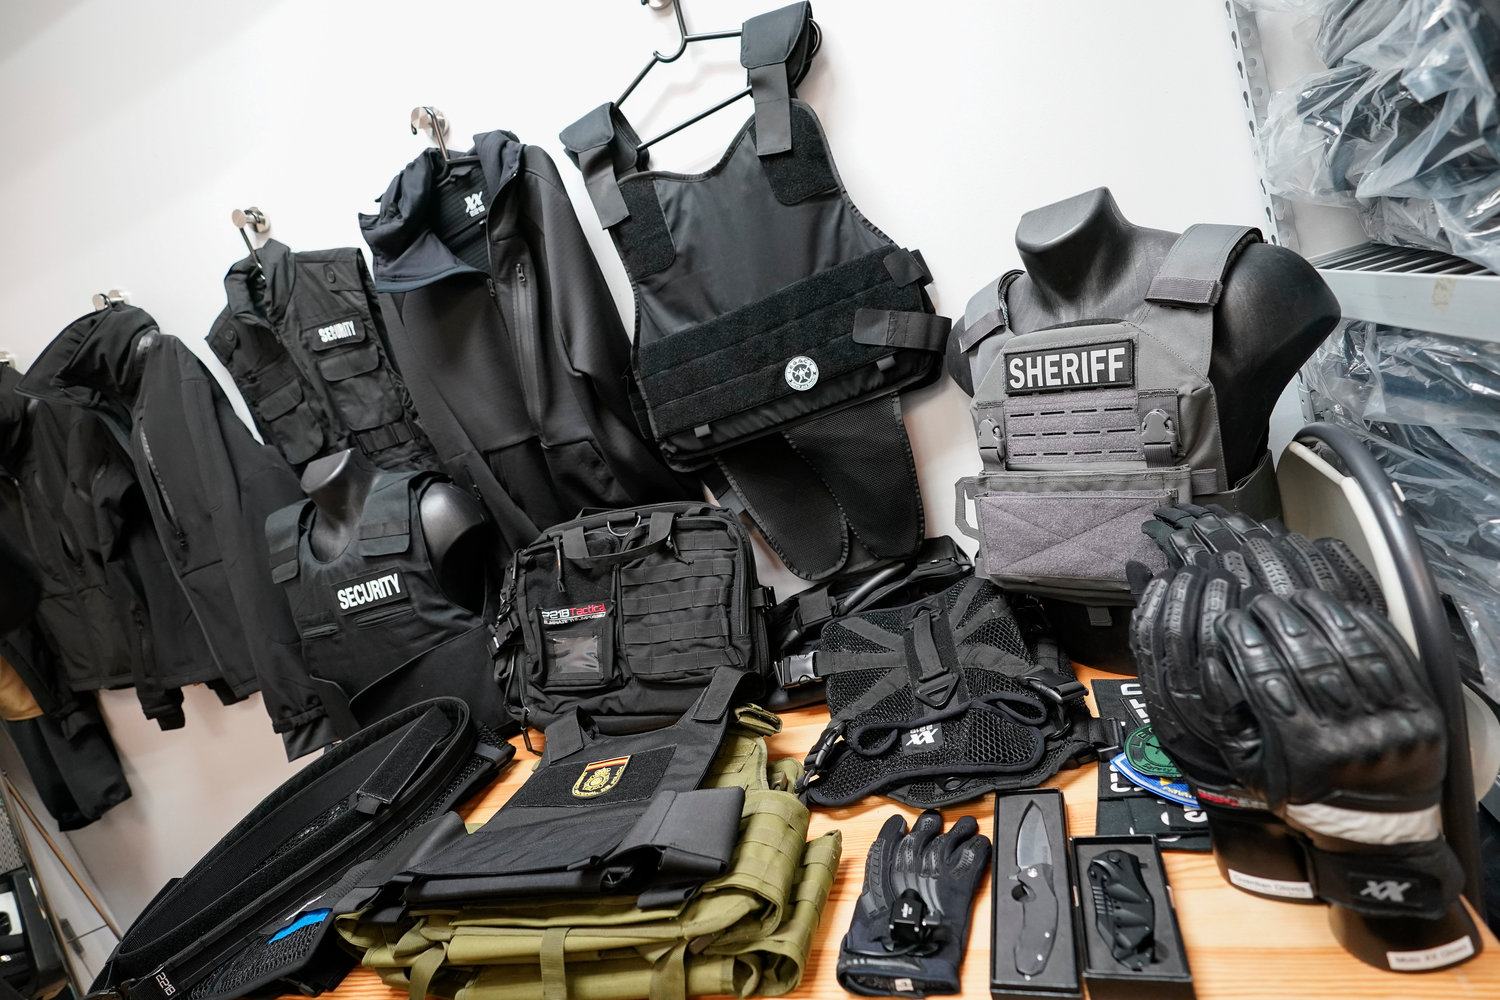 Tactical gear are on display at 221B Tactical's company headquarter in New York, Tuesday, June 14, 2022. (AP Photo/Mary Altaffer)